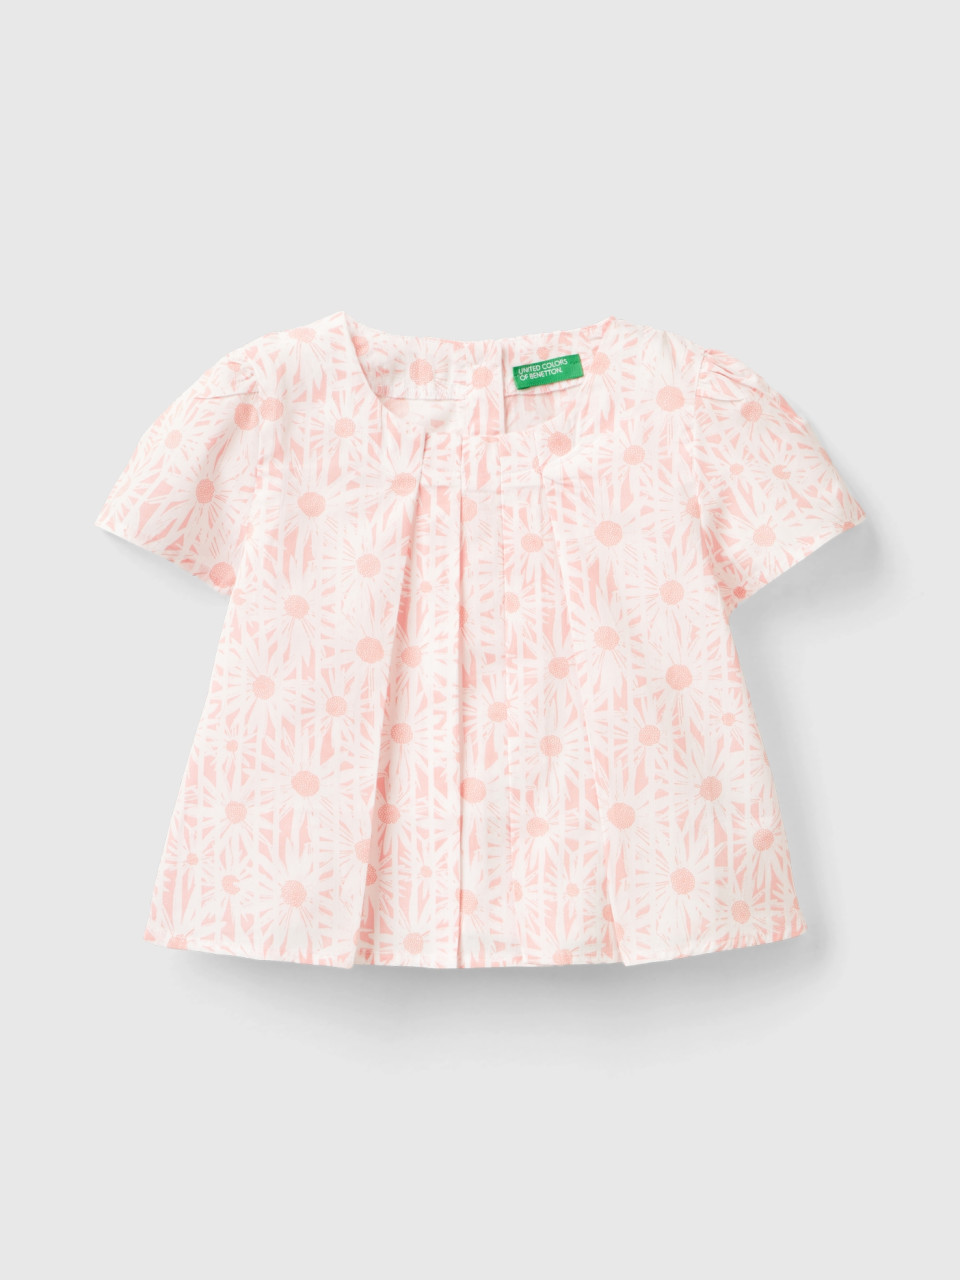 Benetton, Striped And Floral Blouse, Soft Pink, Kids